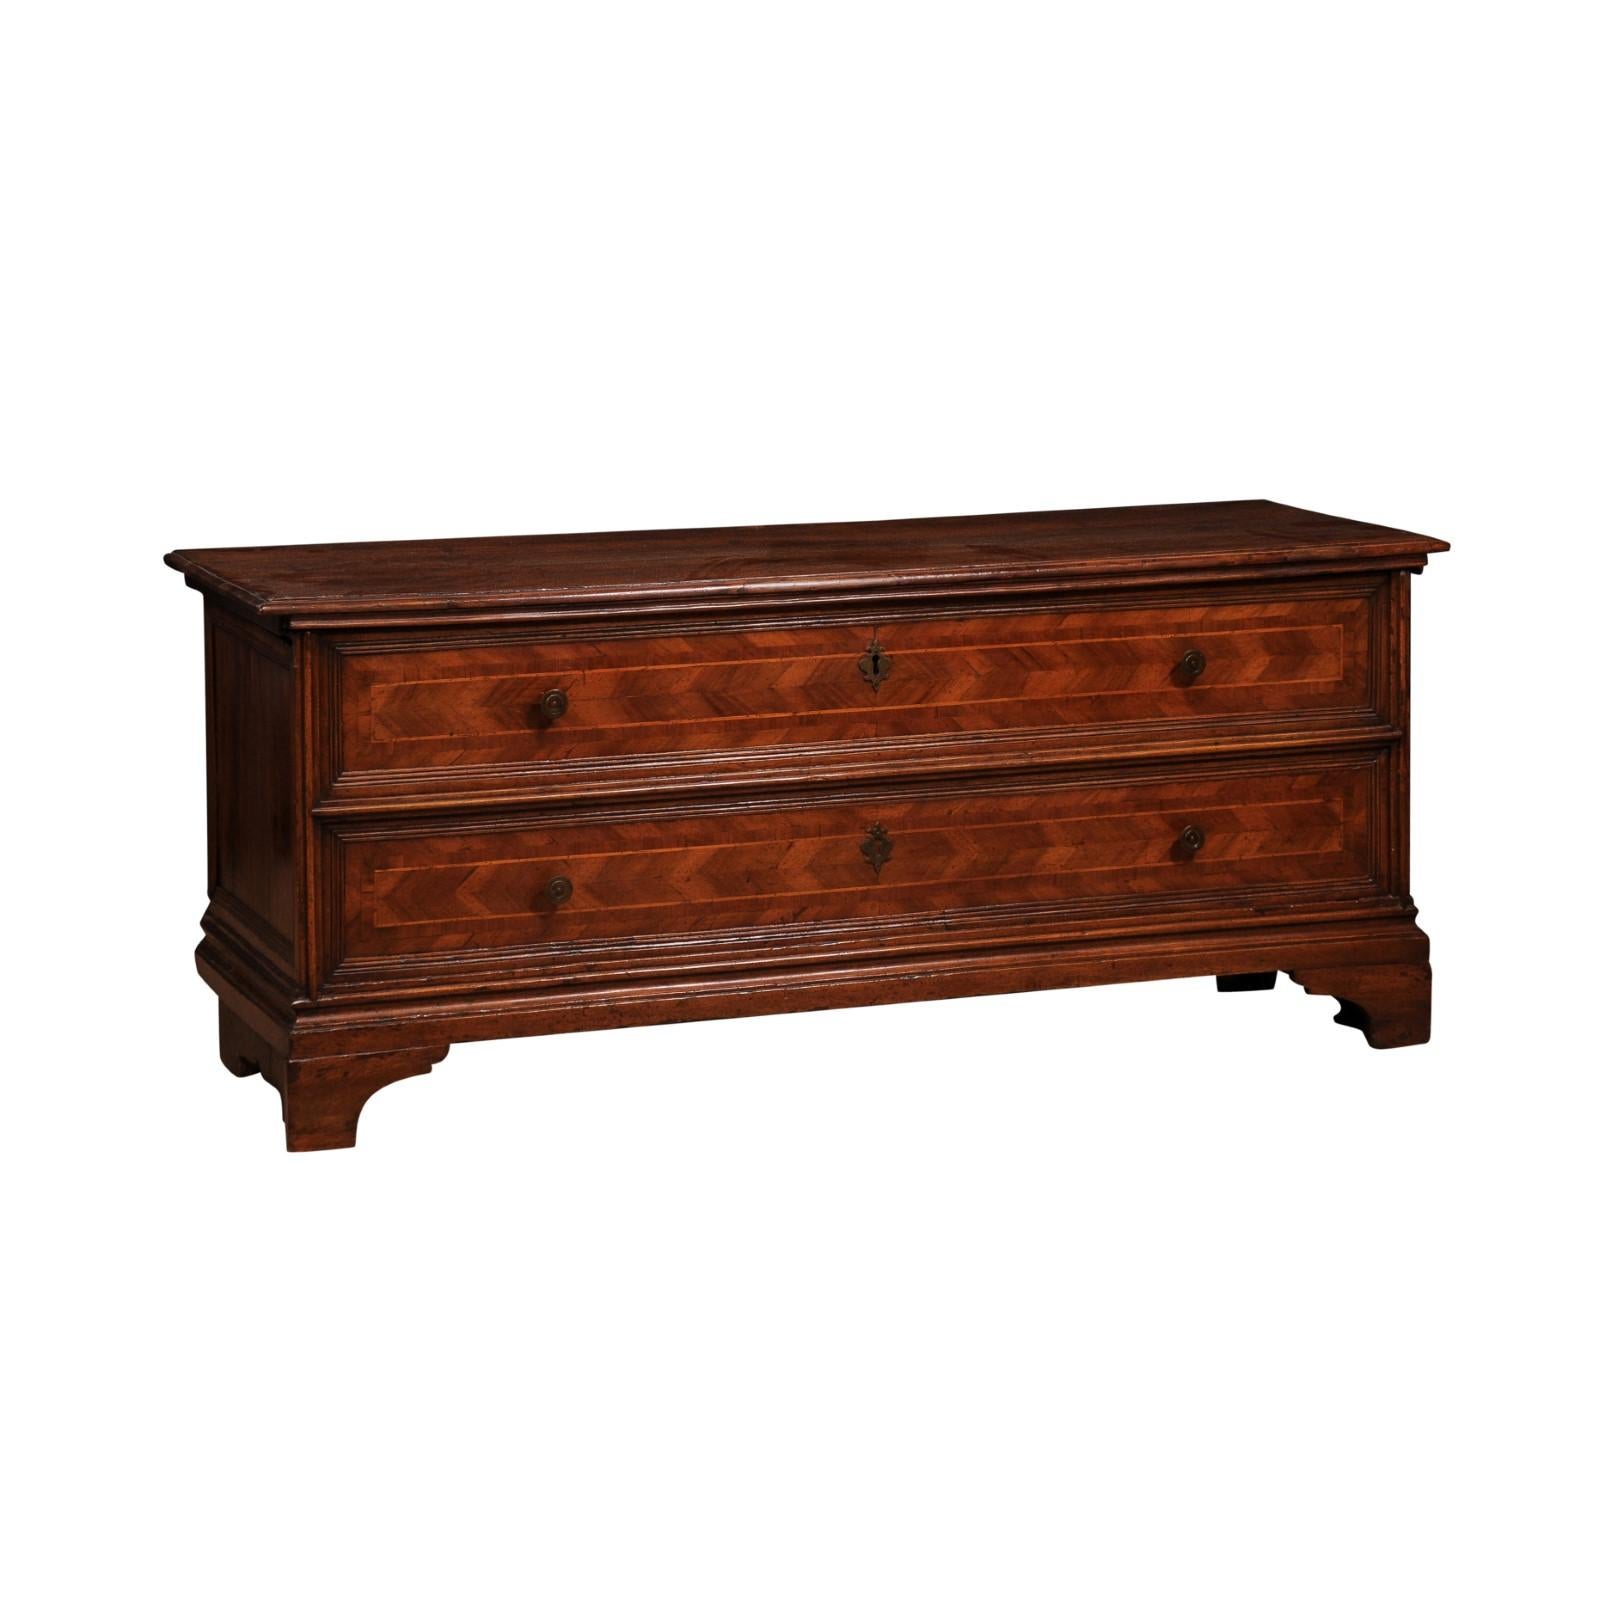 A Venetian walnut and mahogany blanket chest from the 20th century with marquetry décor and faux drawers. Experience the enchantment of Venice with this exquisite 20th-century Venetian walnut and mahogany blanket chest, a delightful blend of